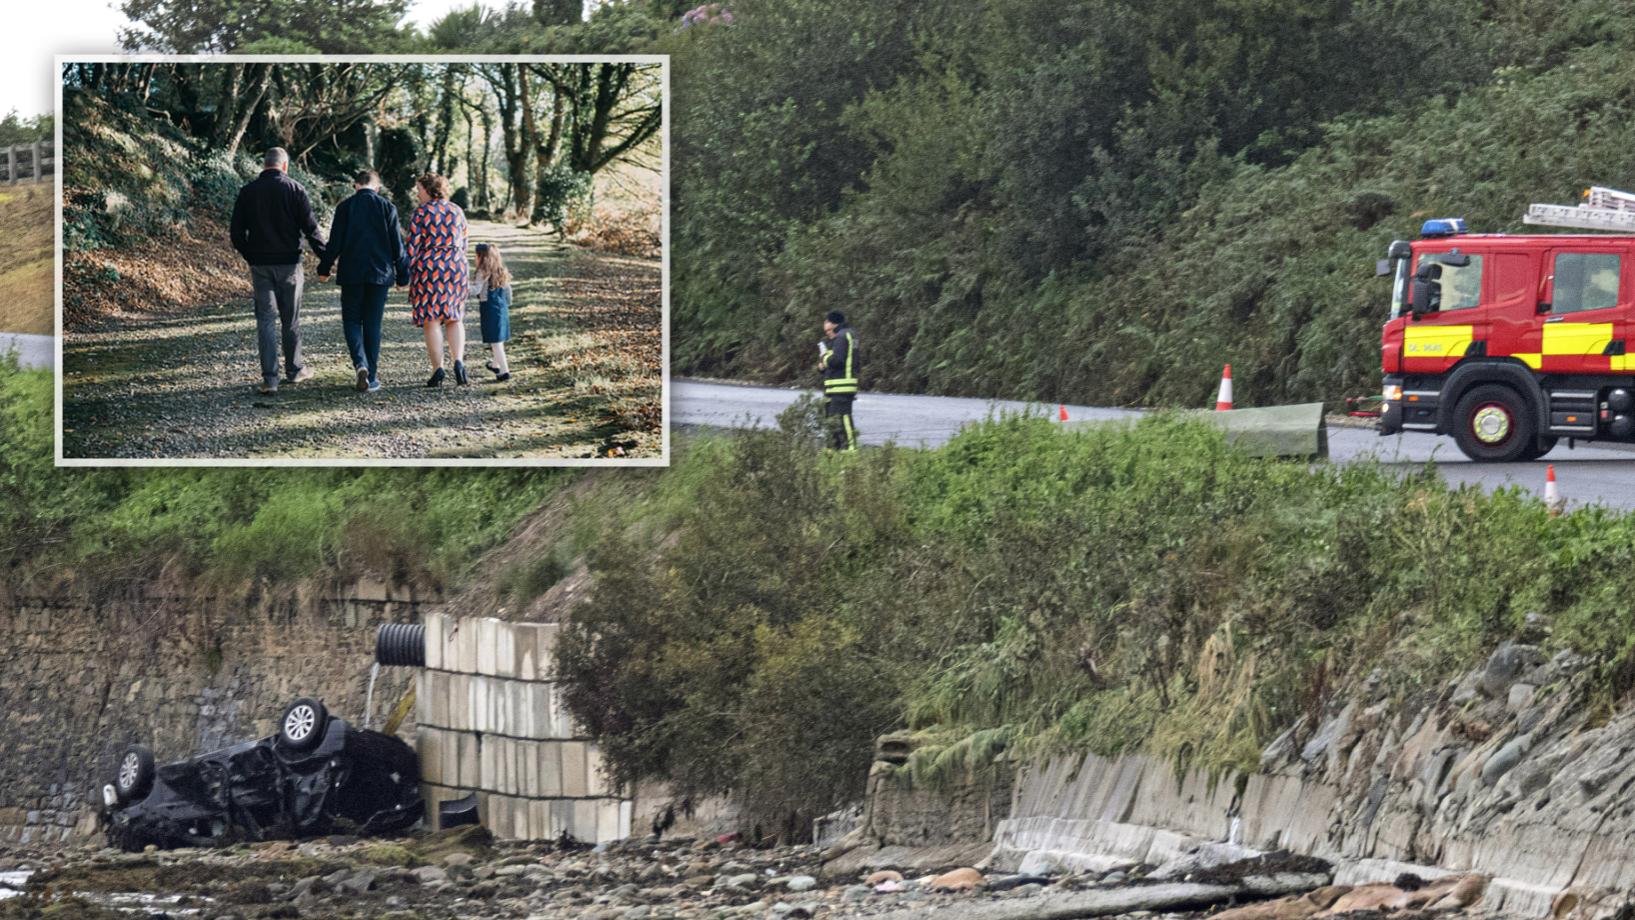 Family tragedy in Ireland: Father and two children die in tragic accident

